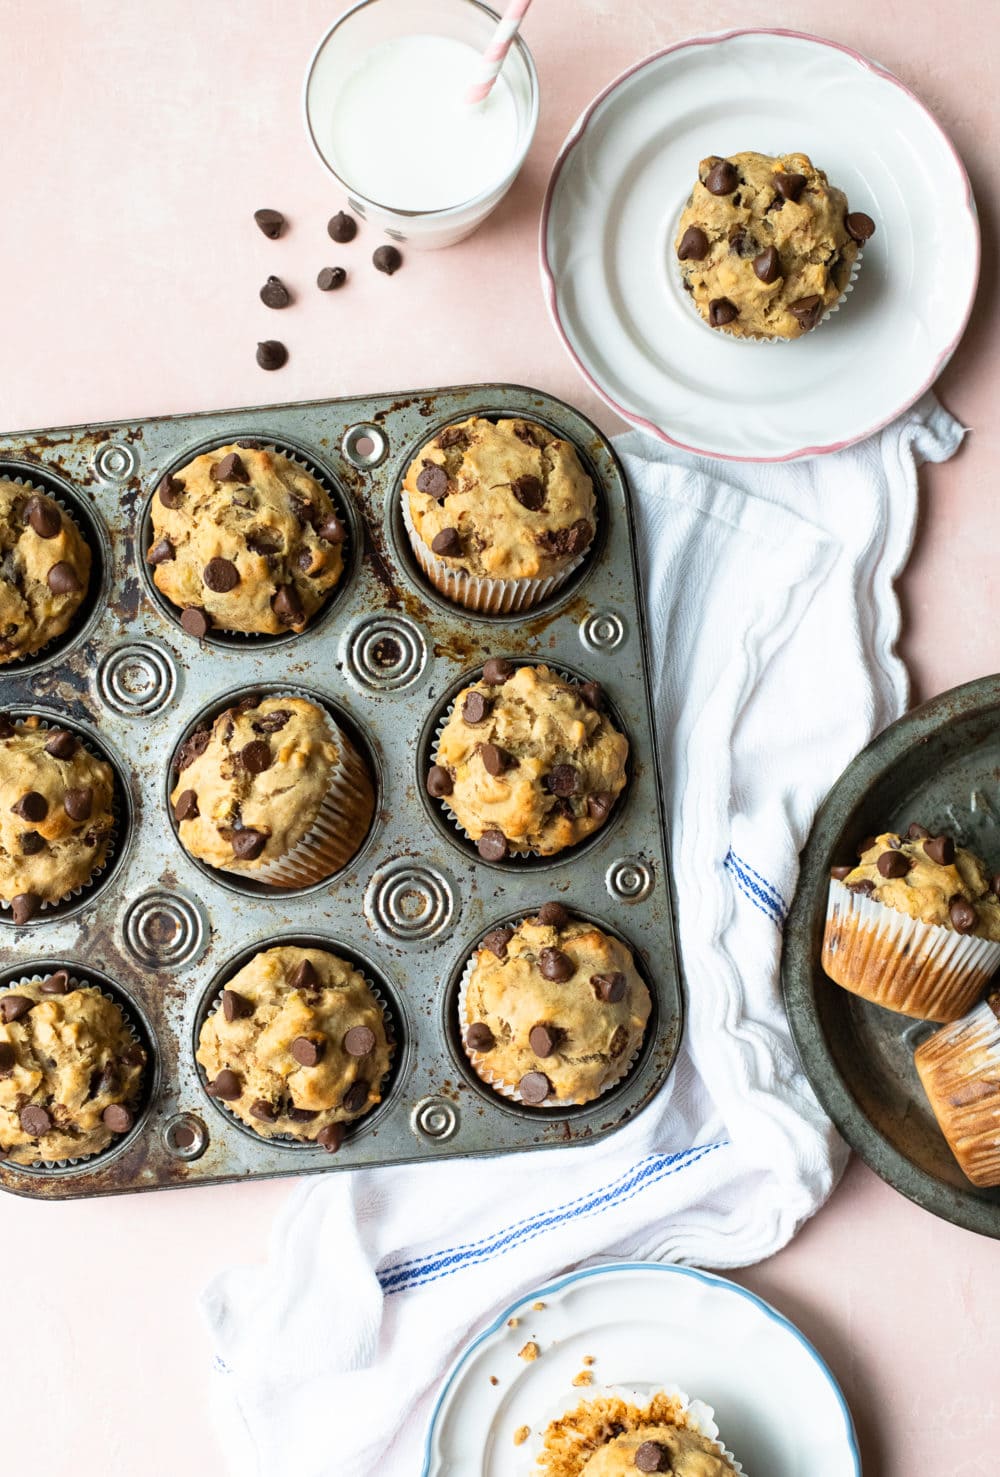 Overhead view of Peanut Butter Banana Chocolate Chip Muffins in a muffin tray, along with extra muffins on plates, over a light pink backdrop.